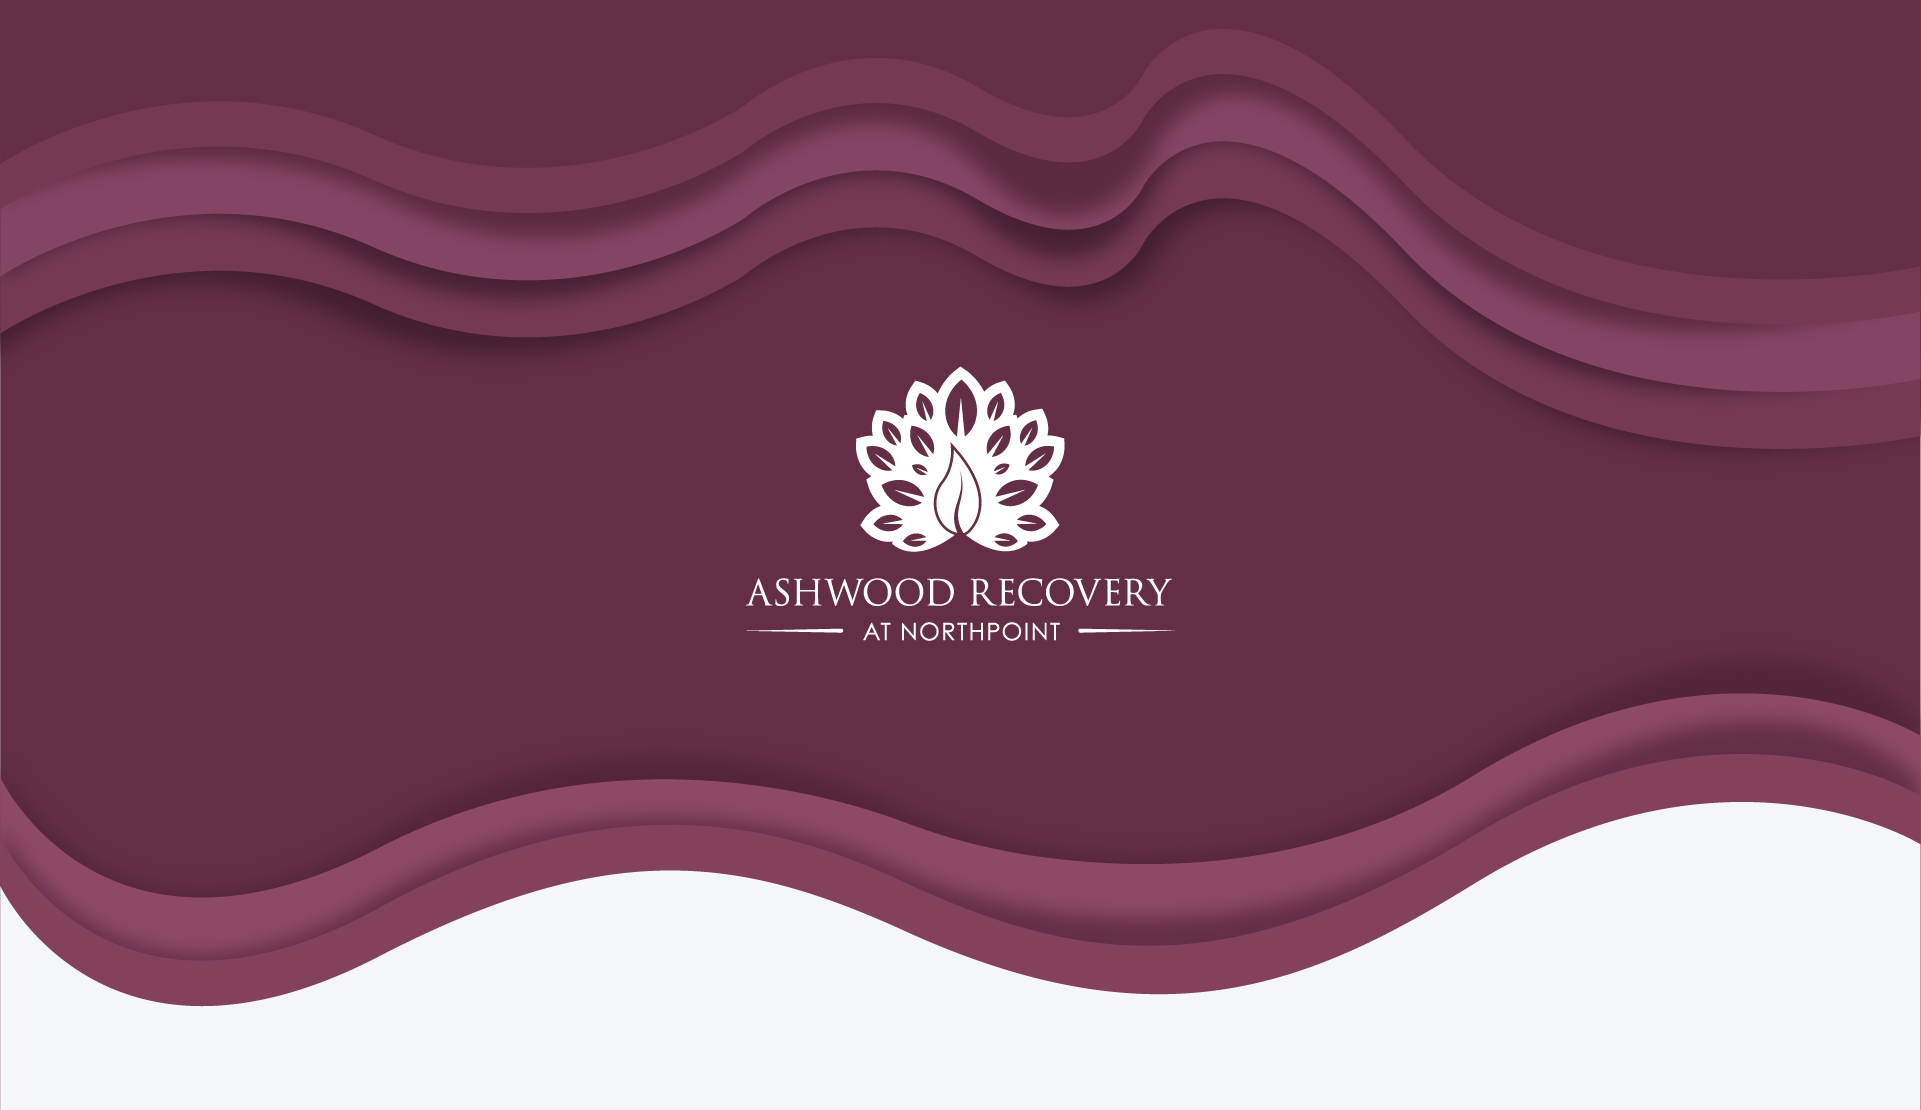 You should try Ashwood Recovery if you or any of your loves one need it